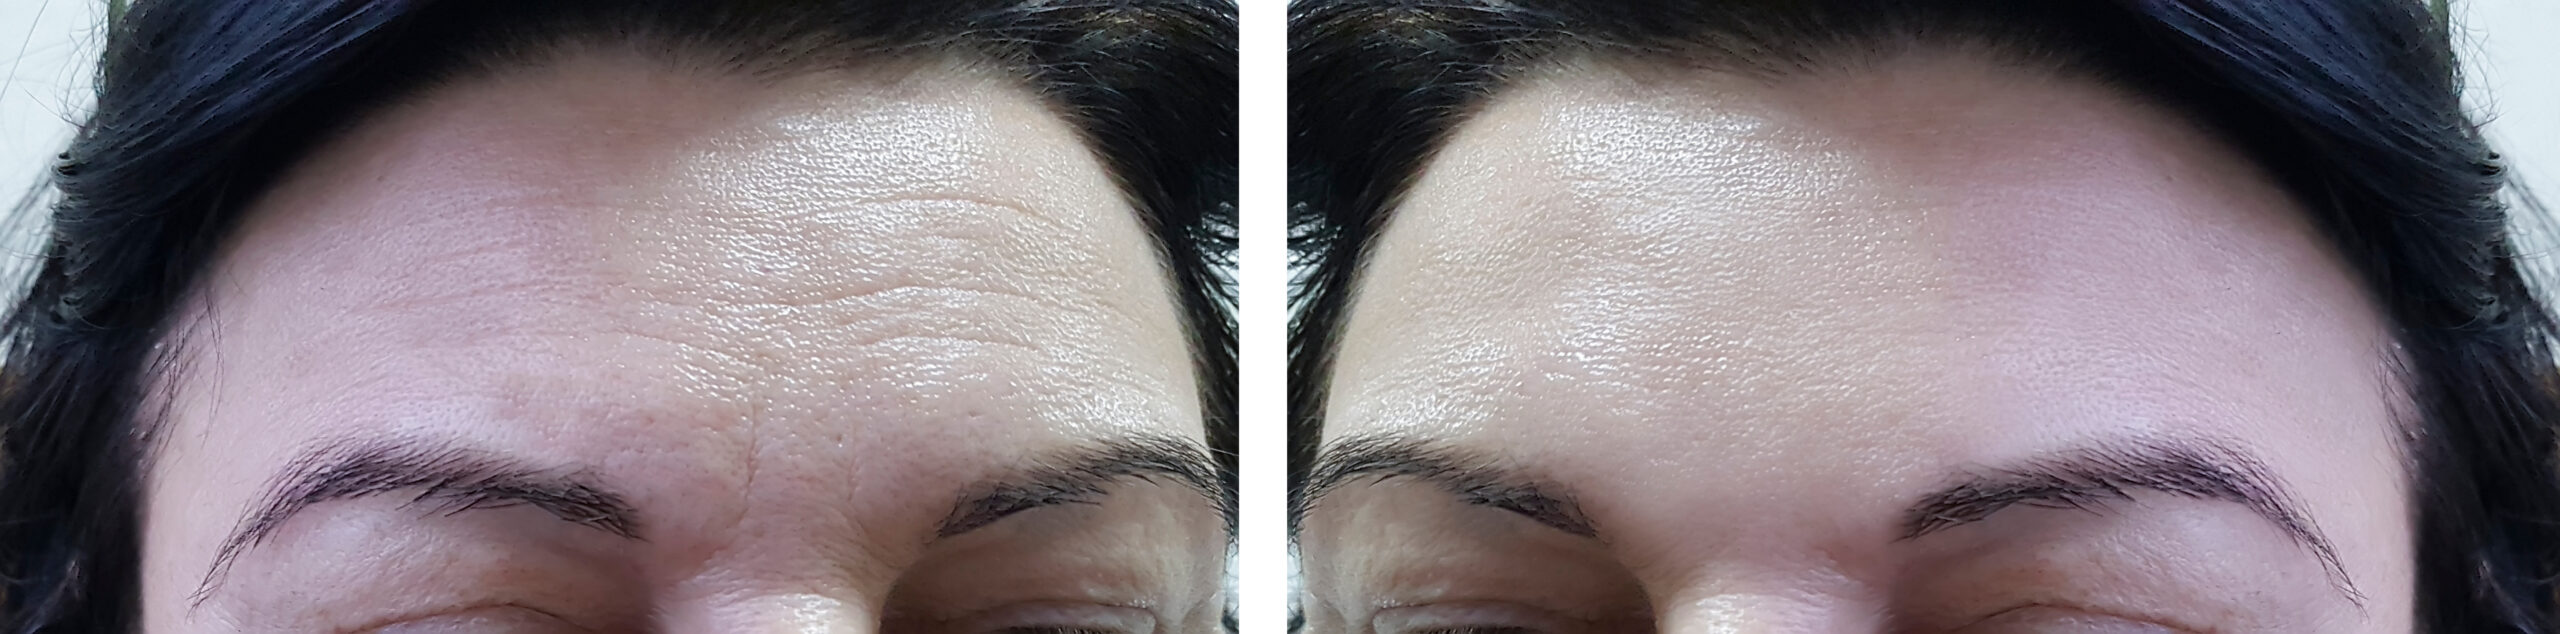 Face,Woman,Forehead,Wrinkles,Before,And,After,Cosmetic,Procedures